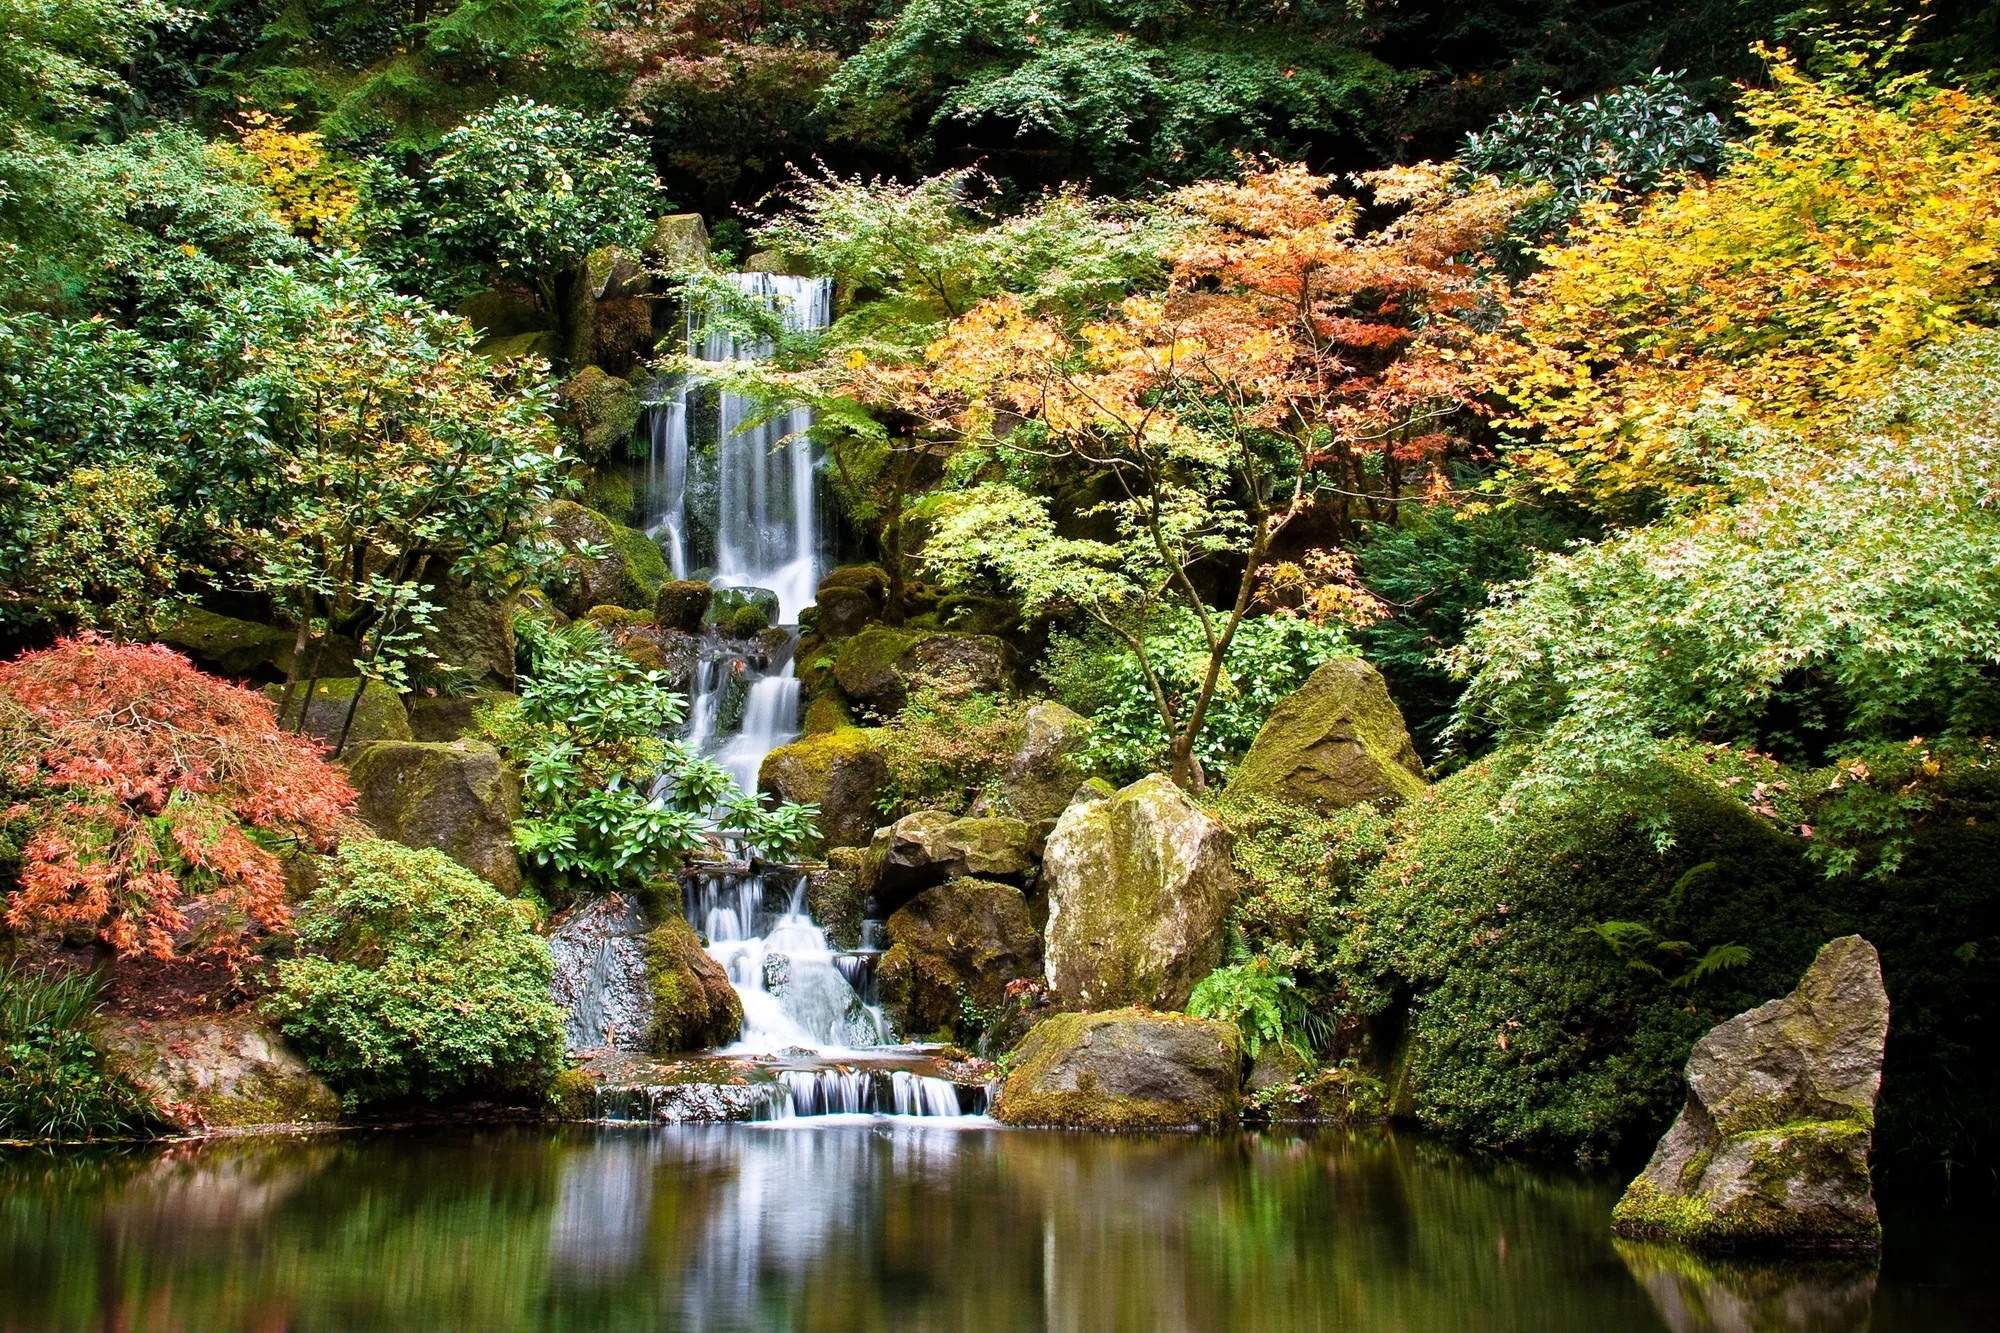 A serene waterfall cascading into a tranquil pond surrounded by vibrant foliage in an idyllic garden setting.